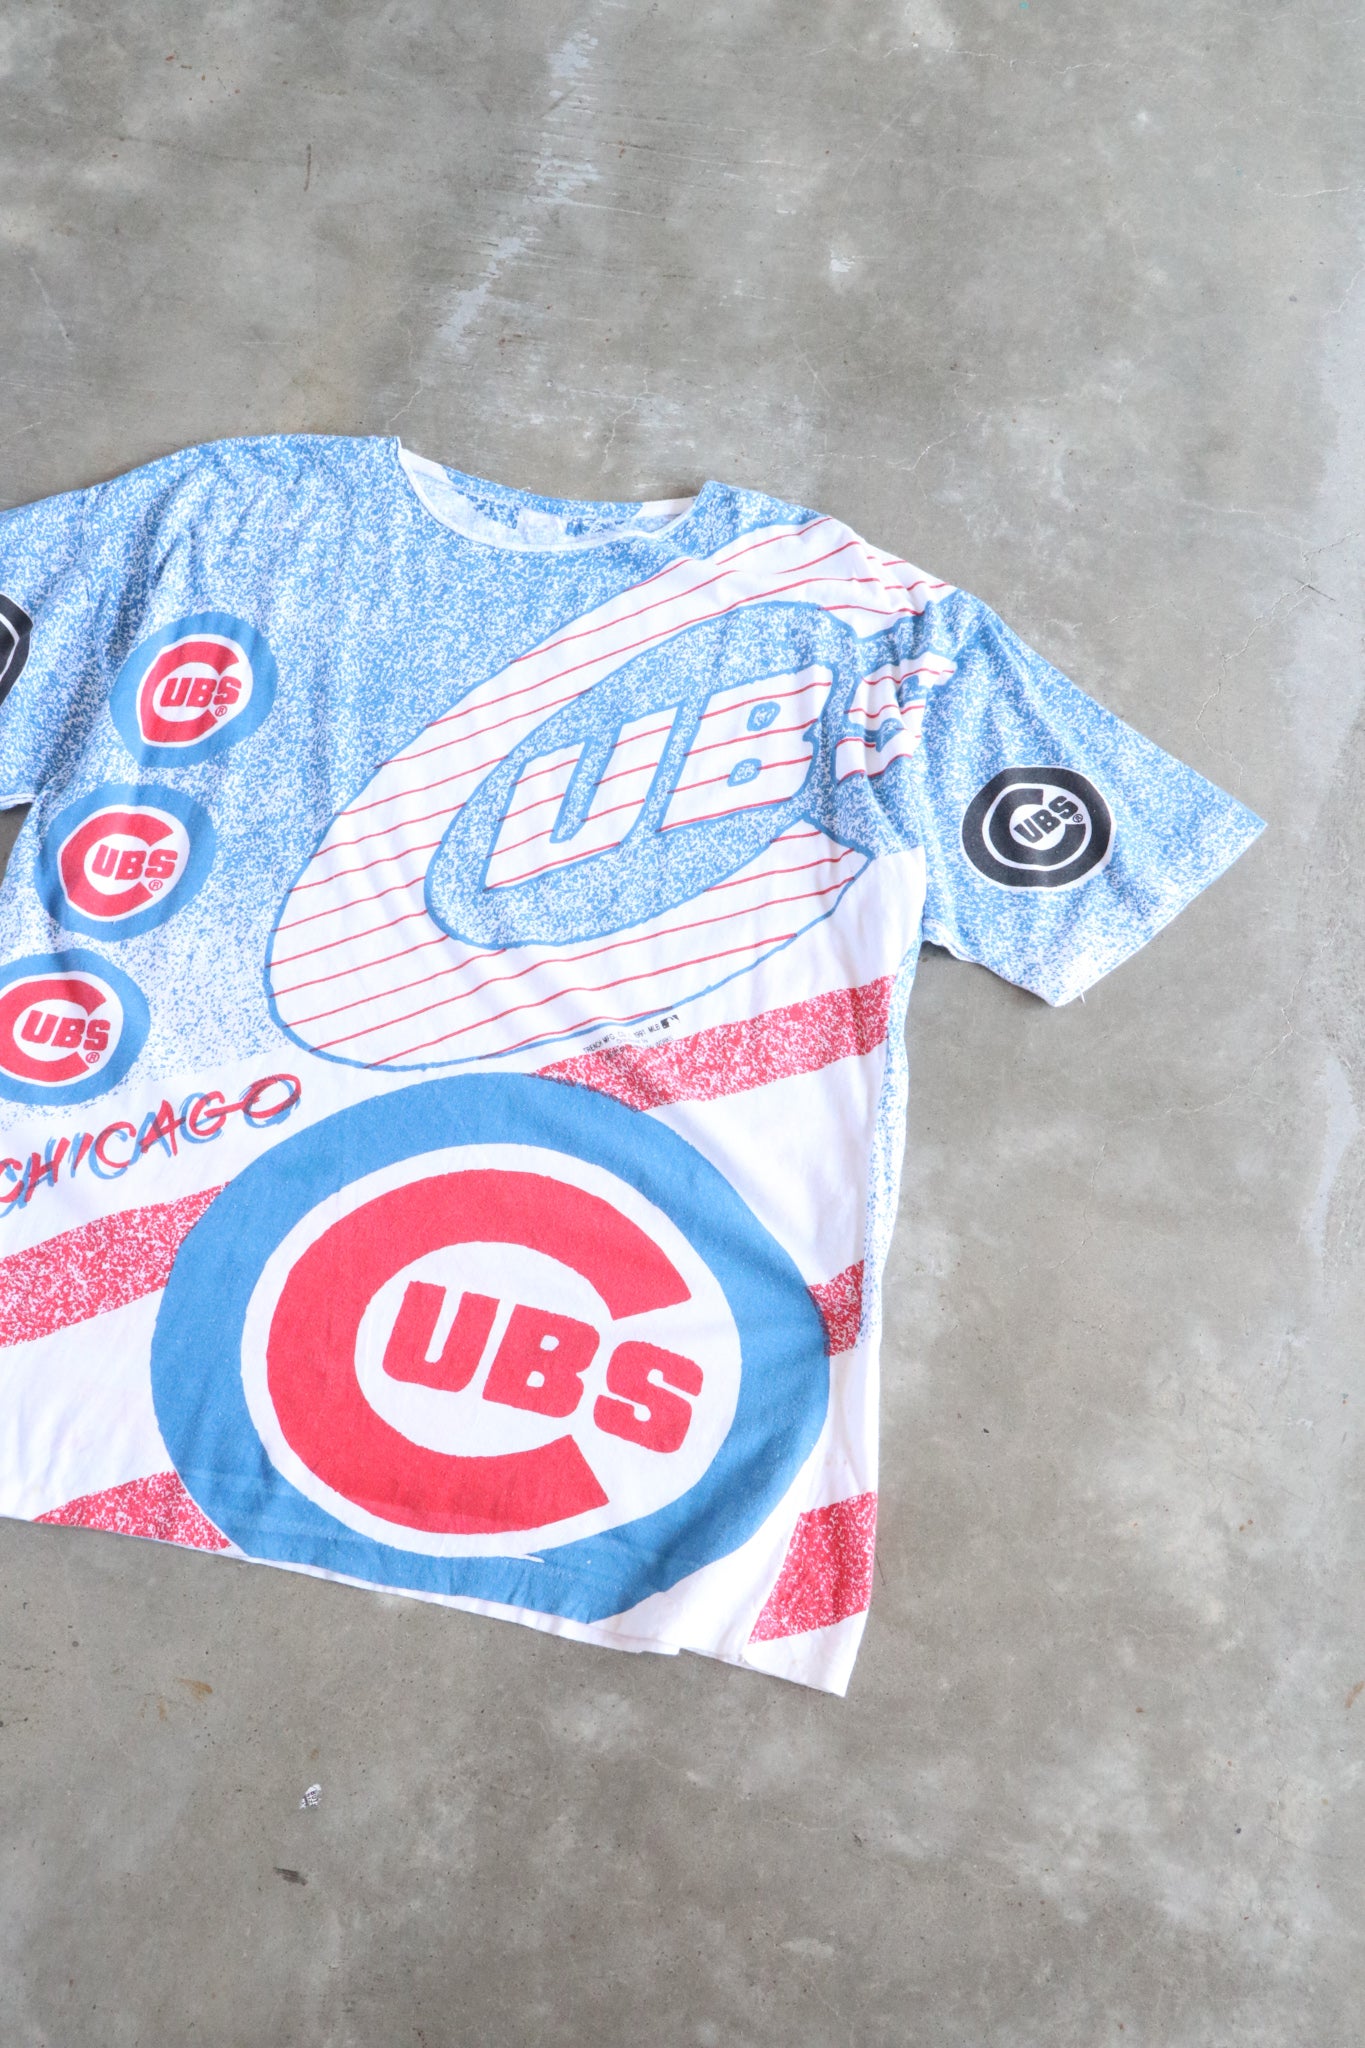 Vintage 1991 MLB Chicago Cubs Tee XL